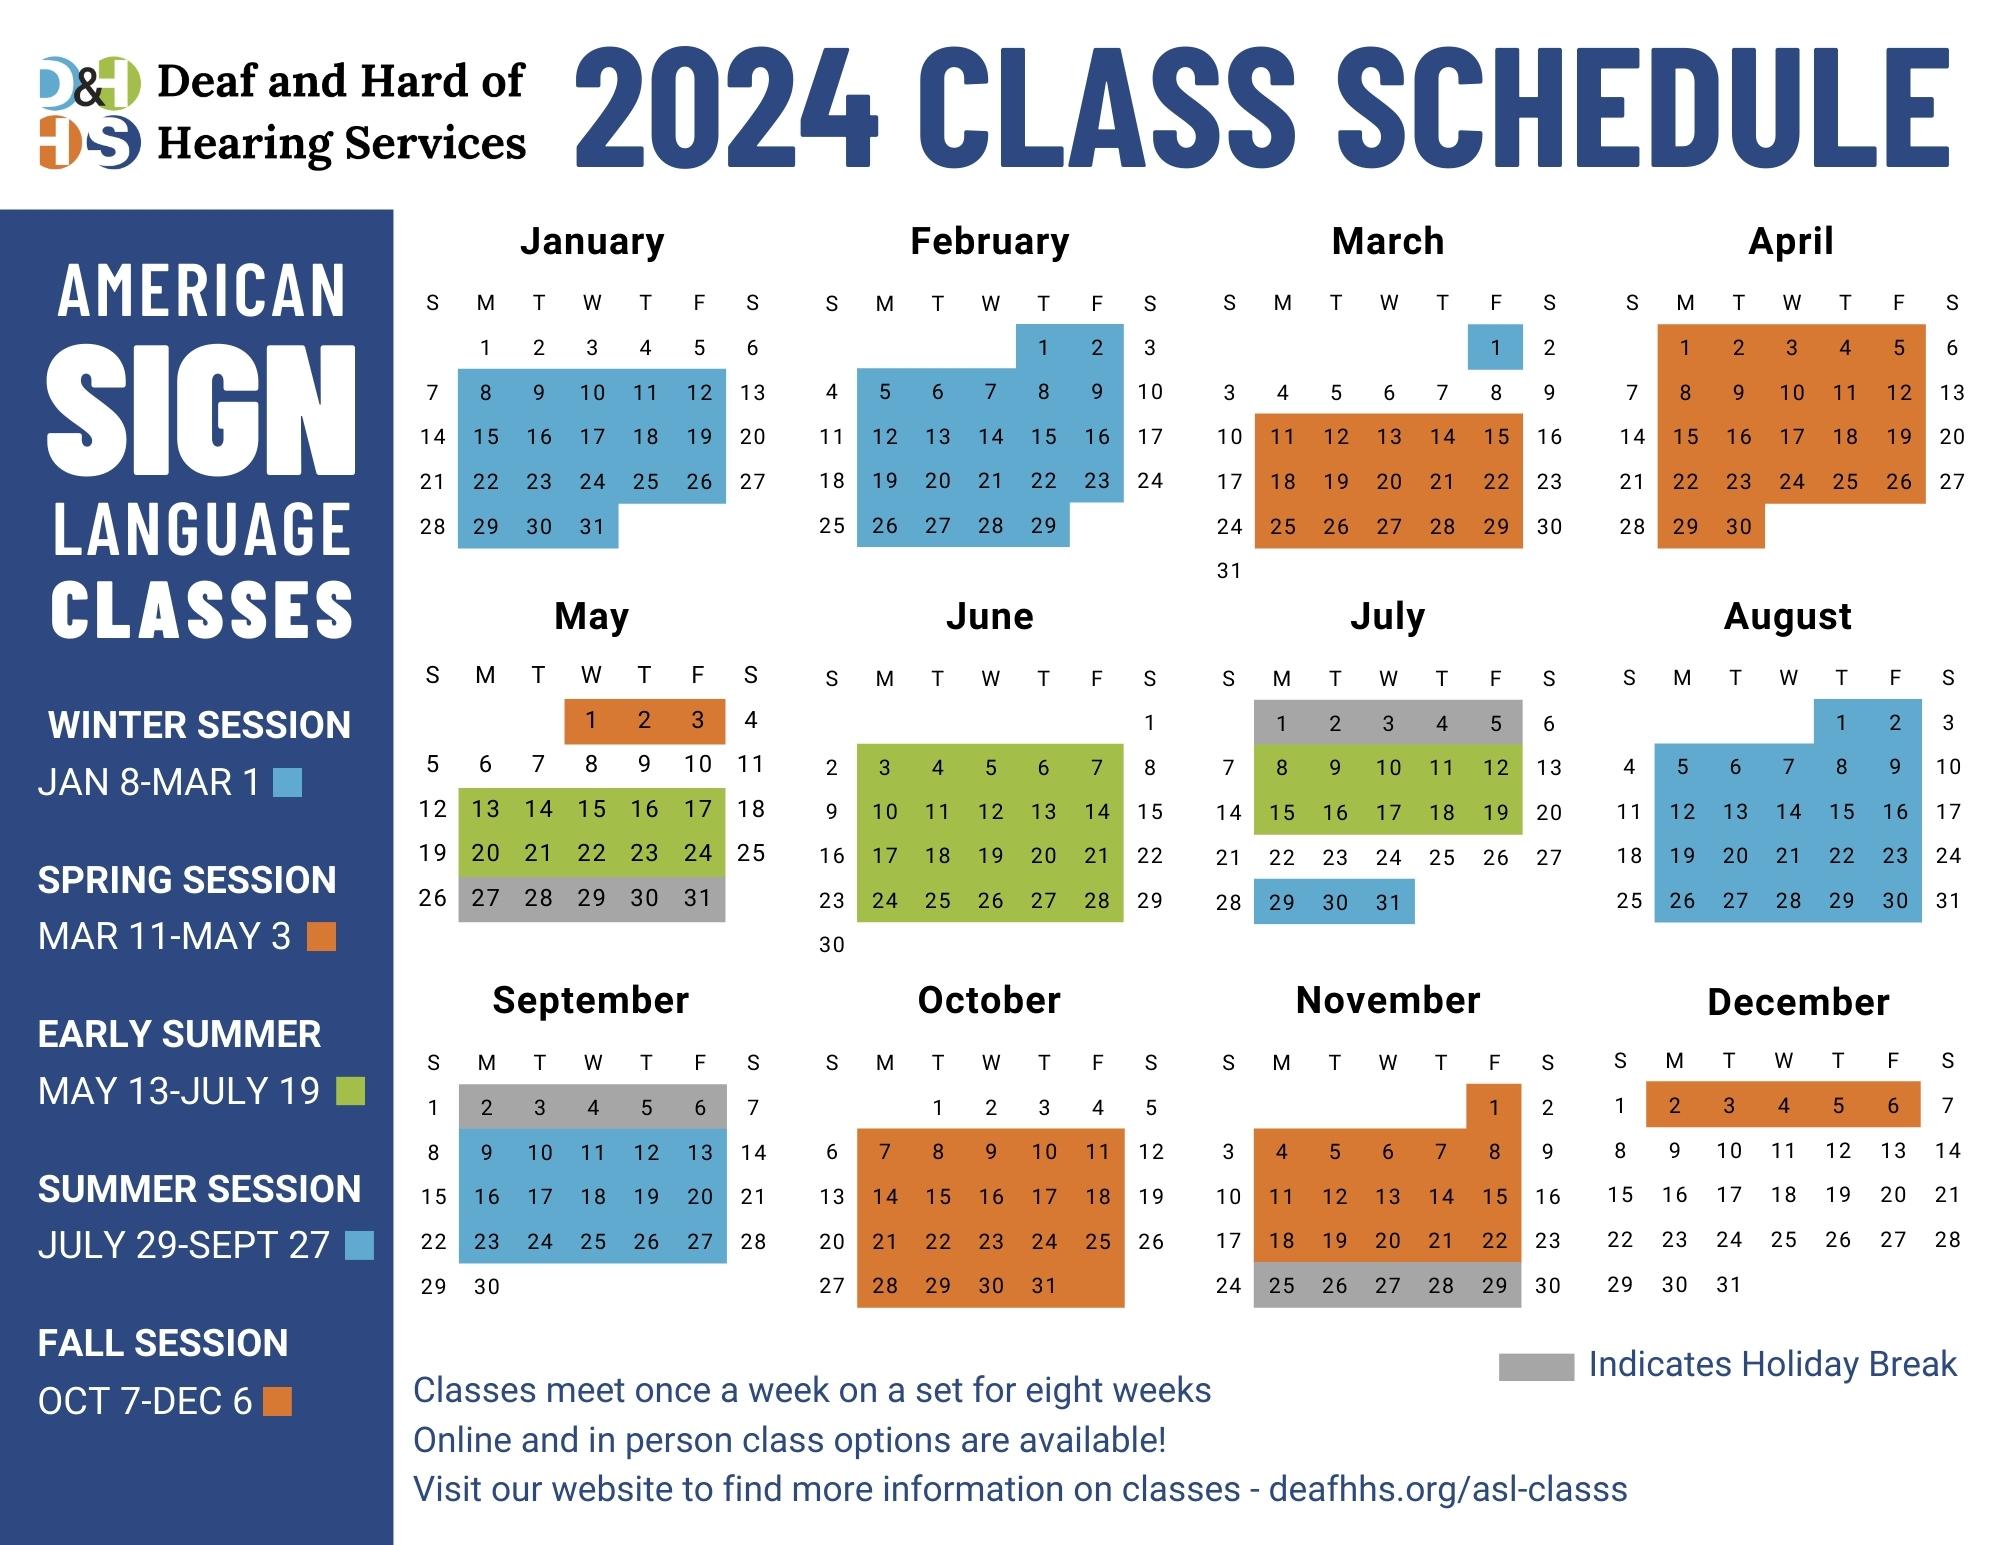 Photo of the 2024 ASL class schedule